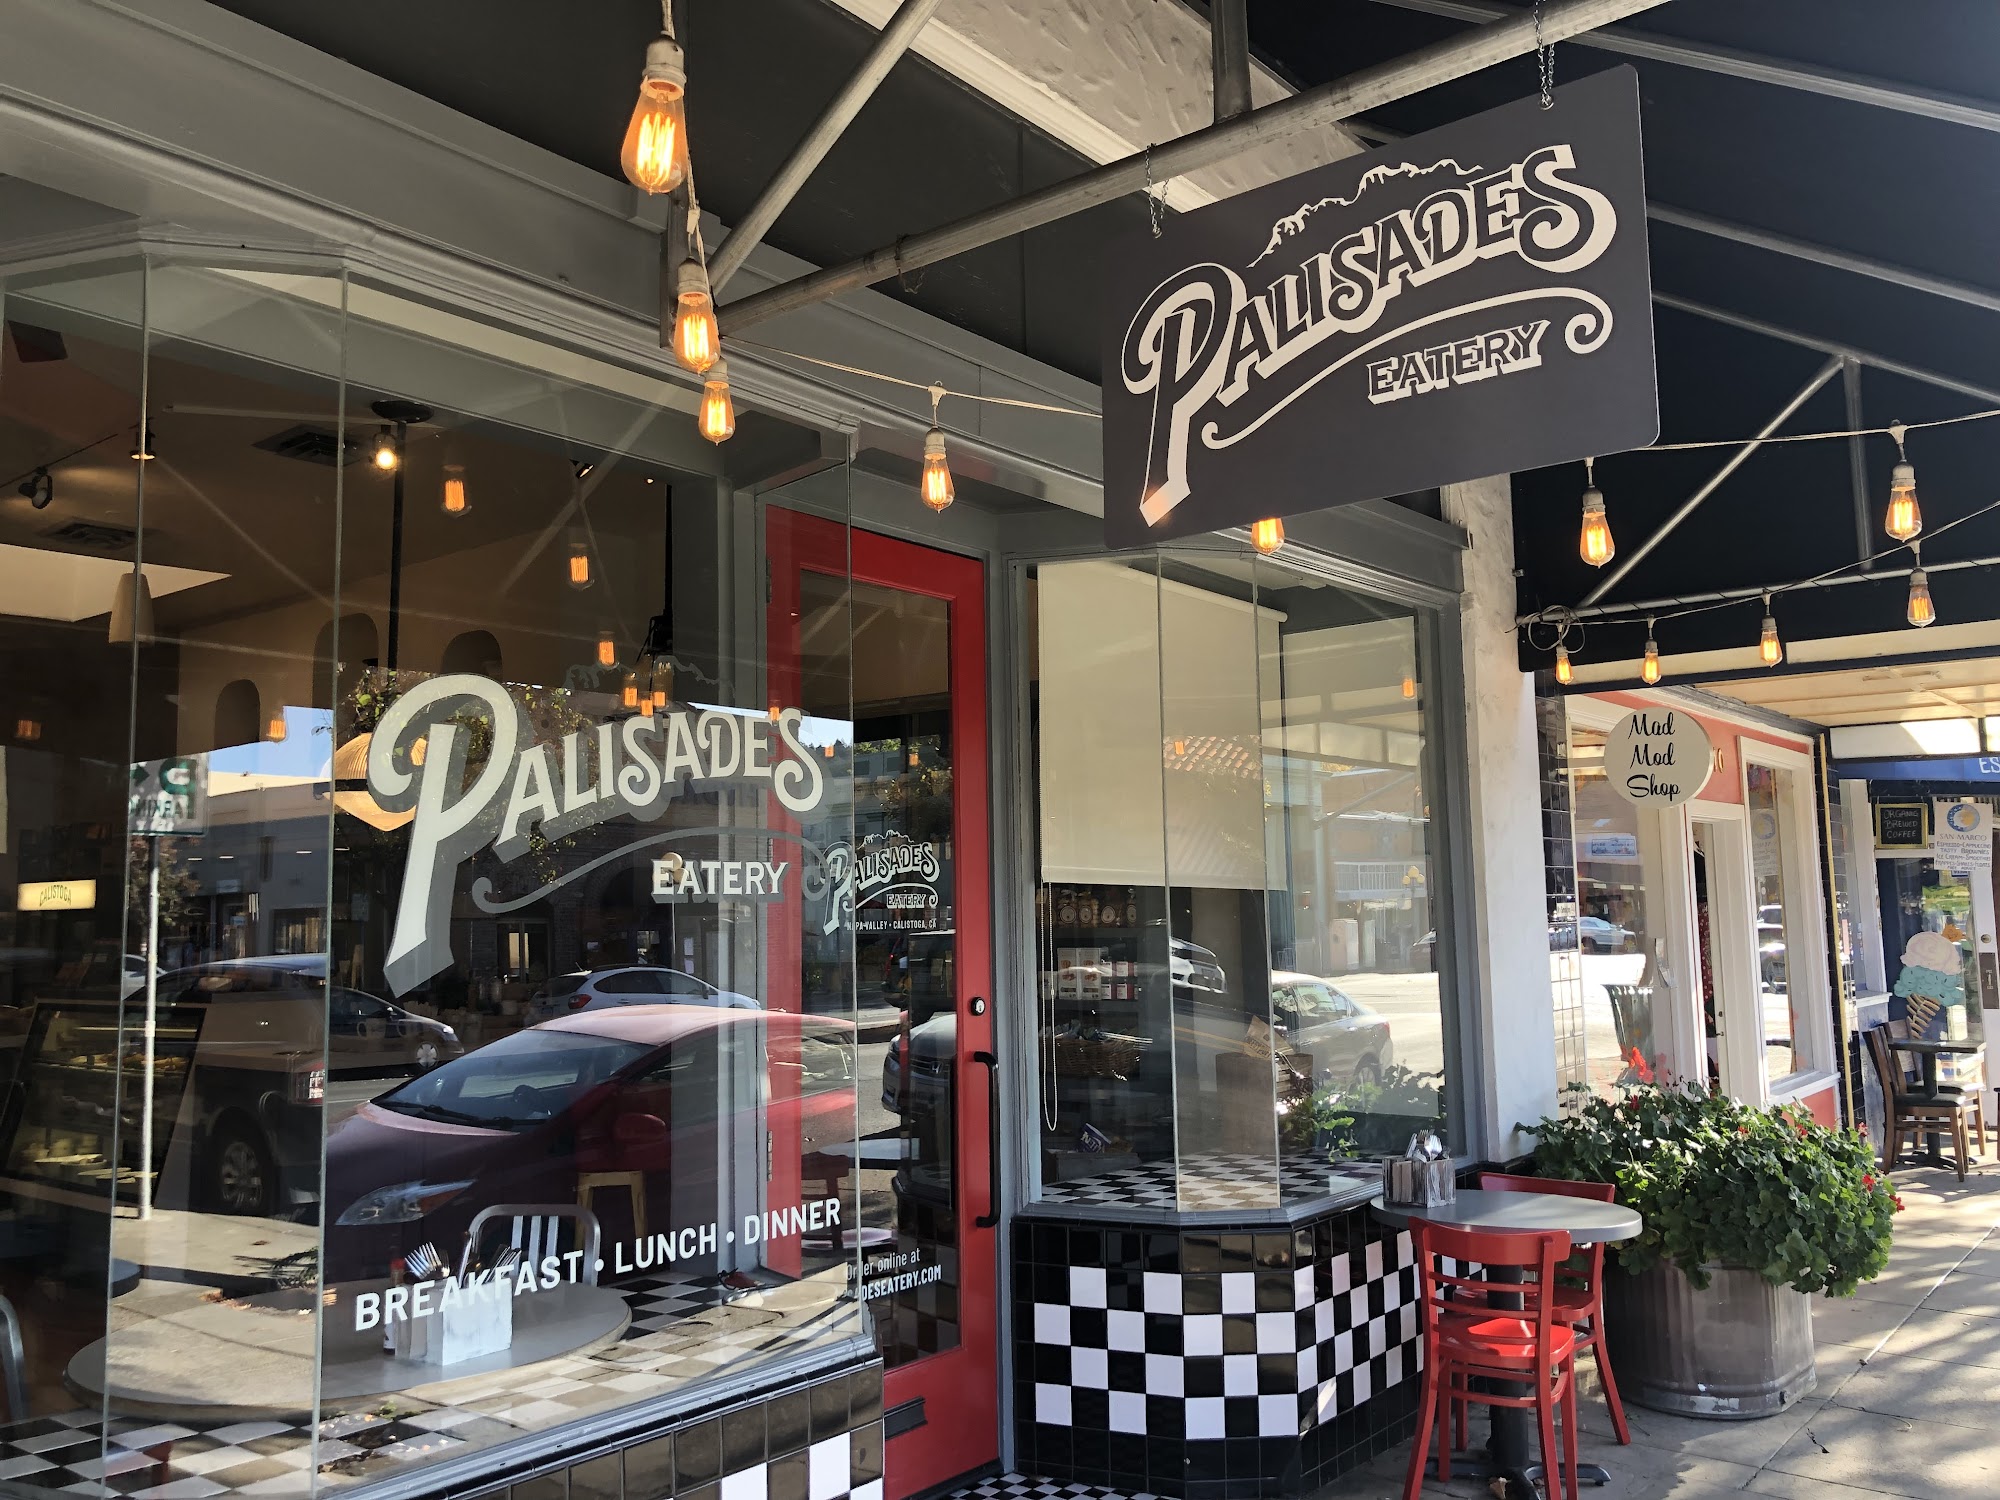 Palisades Eatery